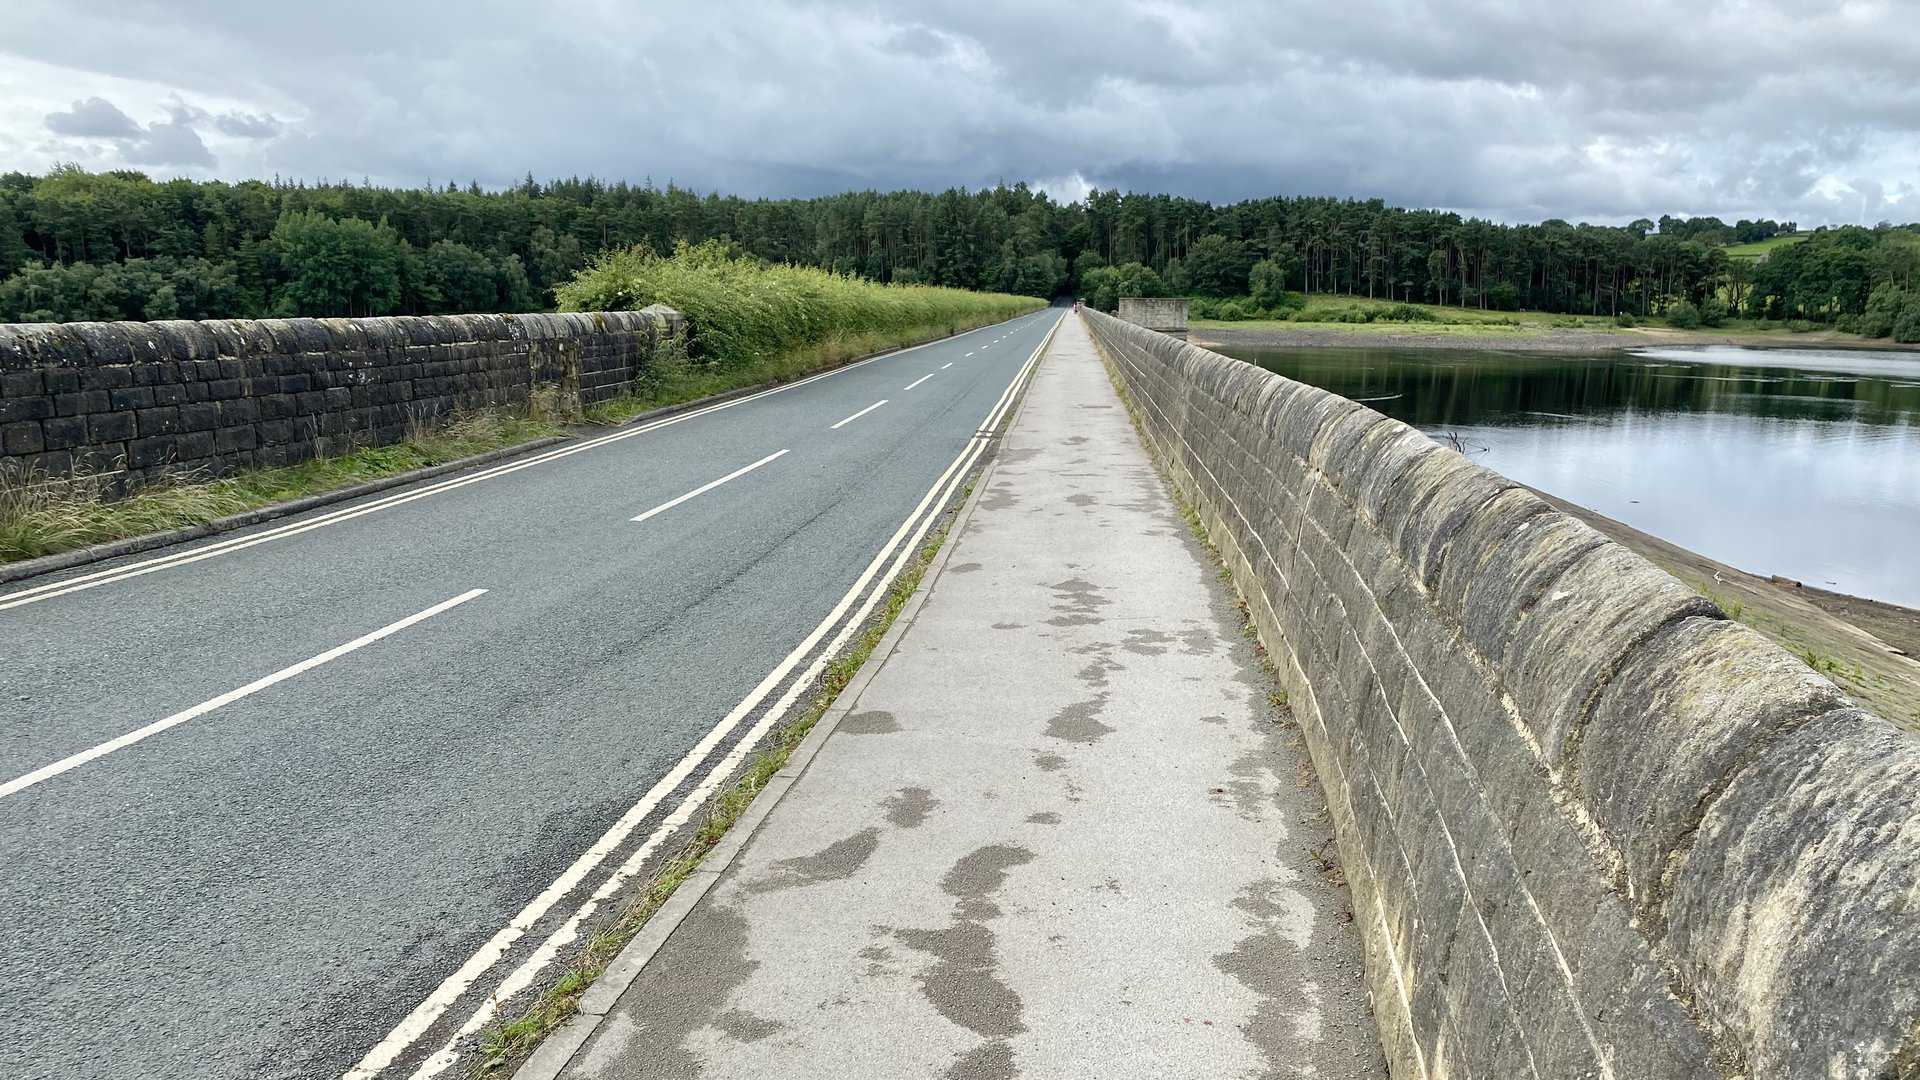 The pedestrian and vehicular path crossing Fewston Embankment.